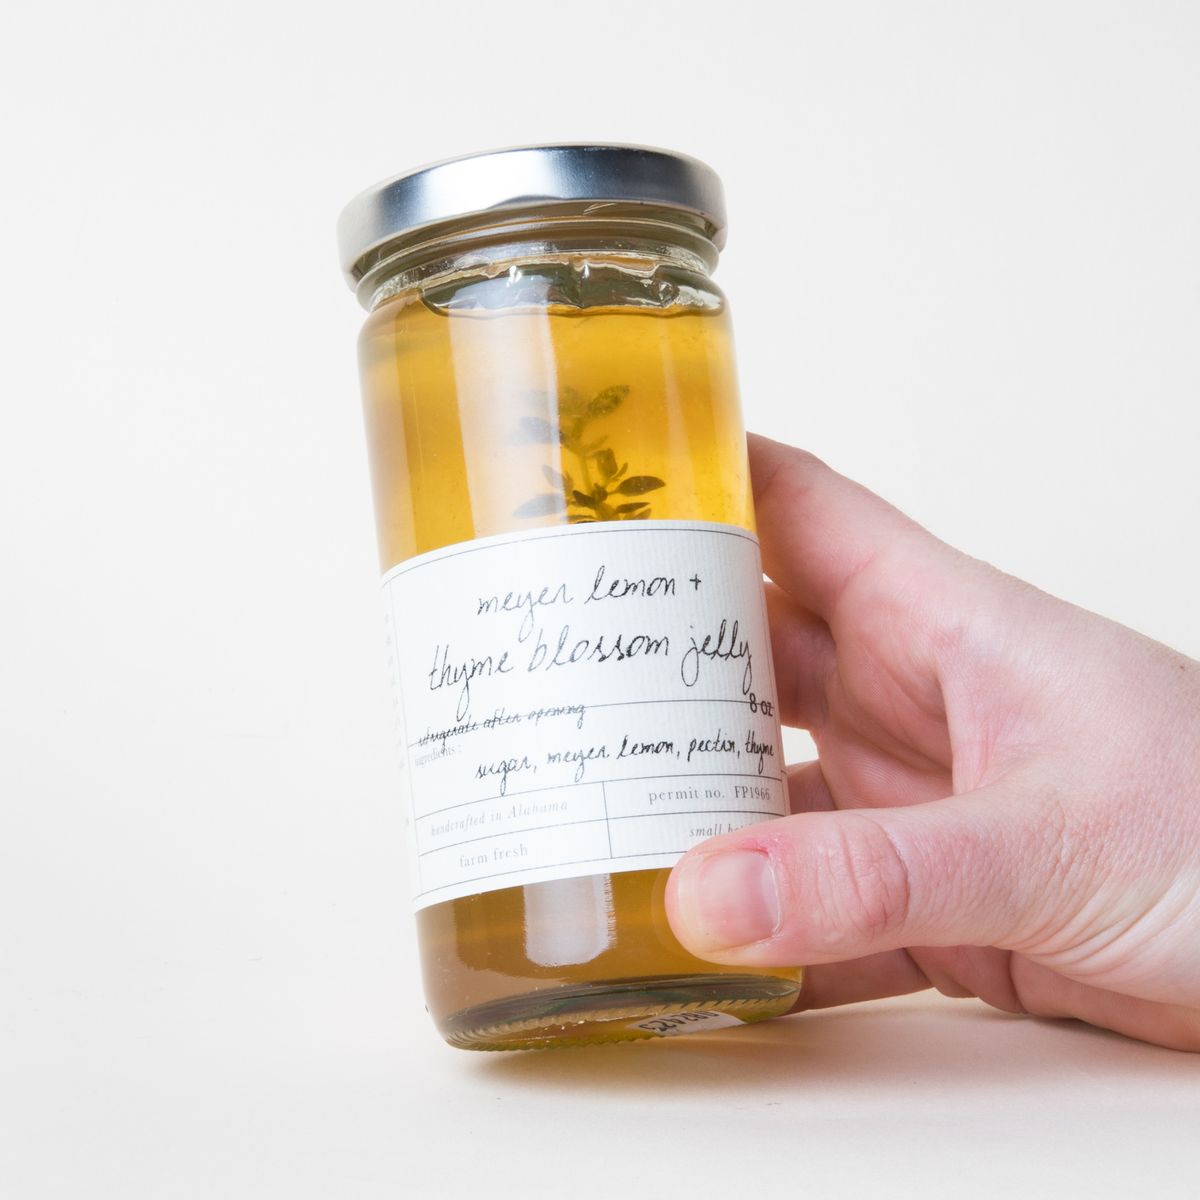 A hand holding a tall glass jar filled with yellow jelly with a white label that reads "Meyer Lemon and Thyme Blossom Jelly"